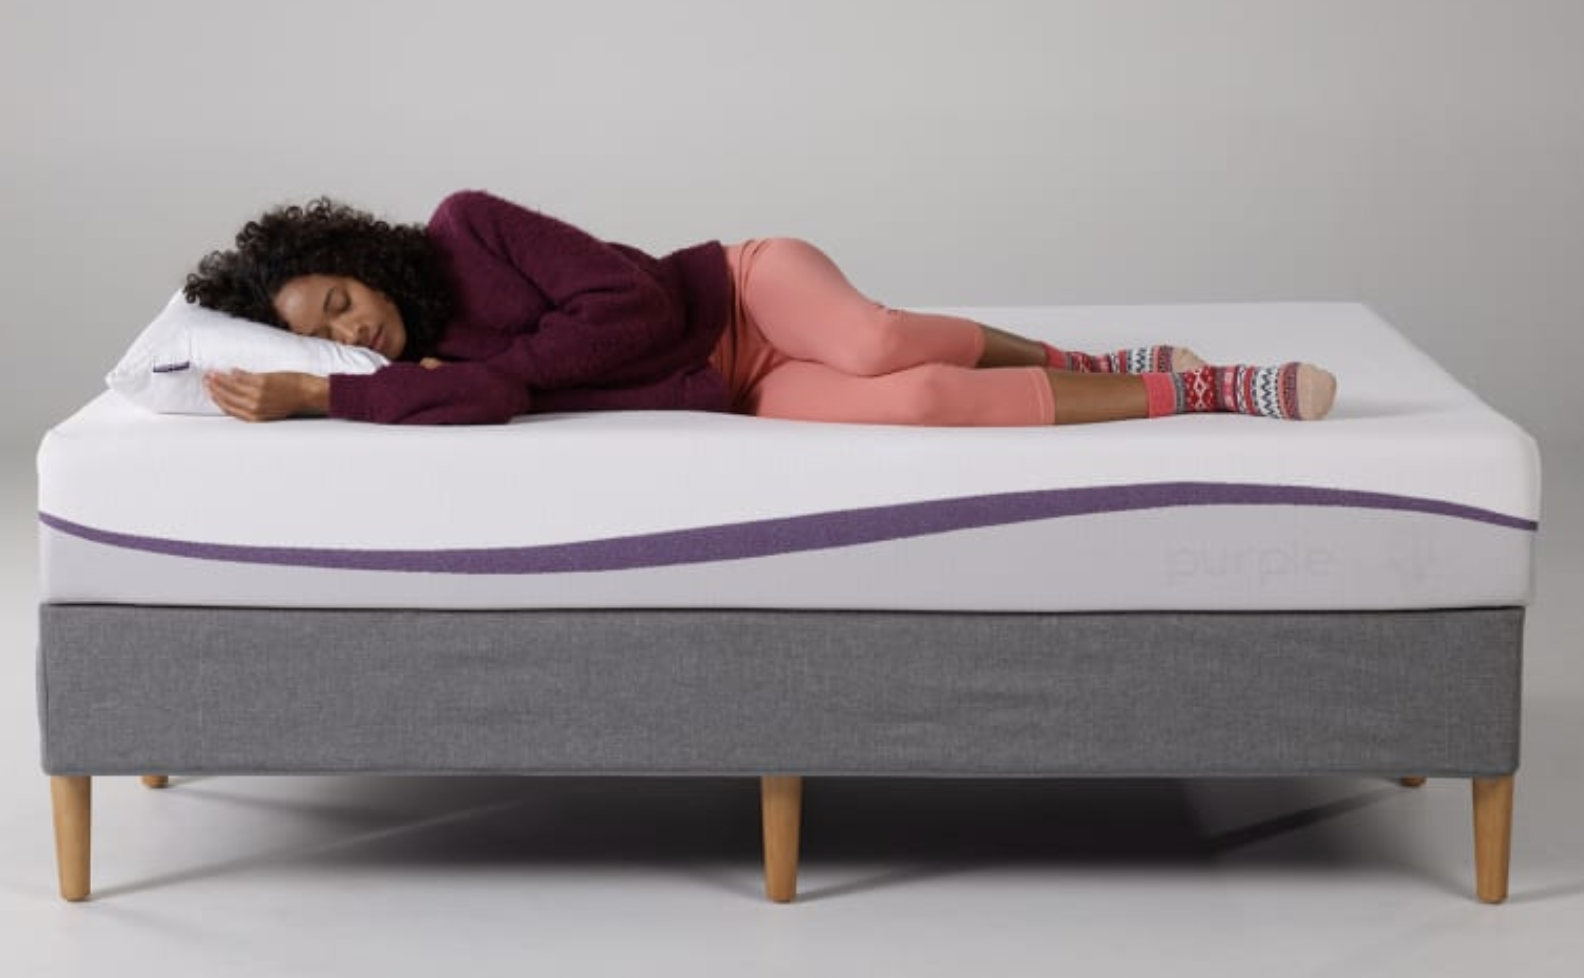 19 Best Mattresses For Back Pain 2022, Best Bed In A Box For Lower Back Pain